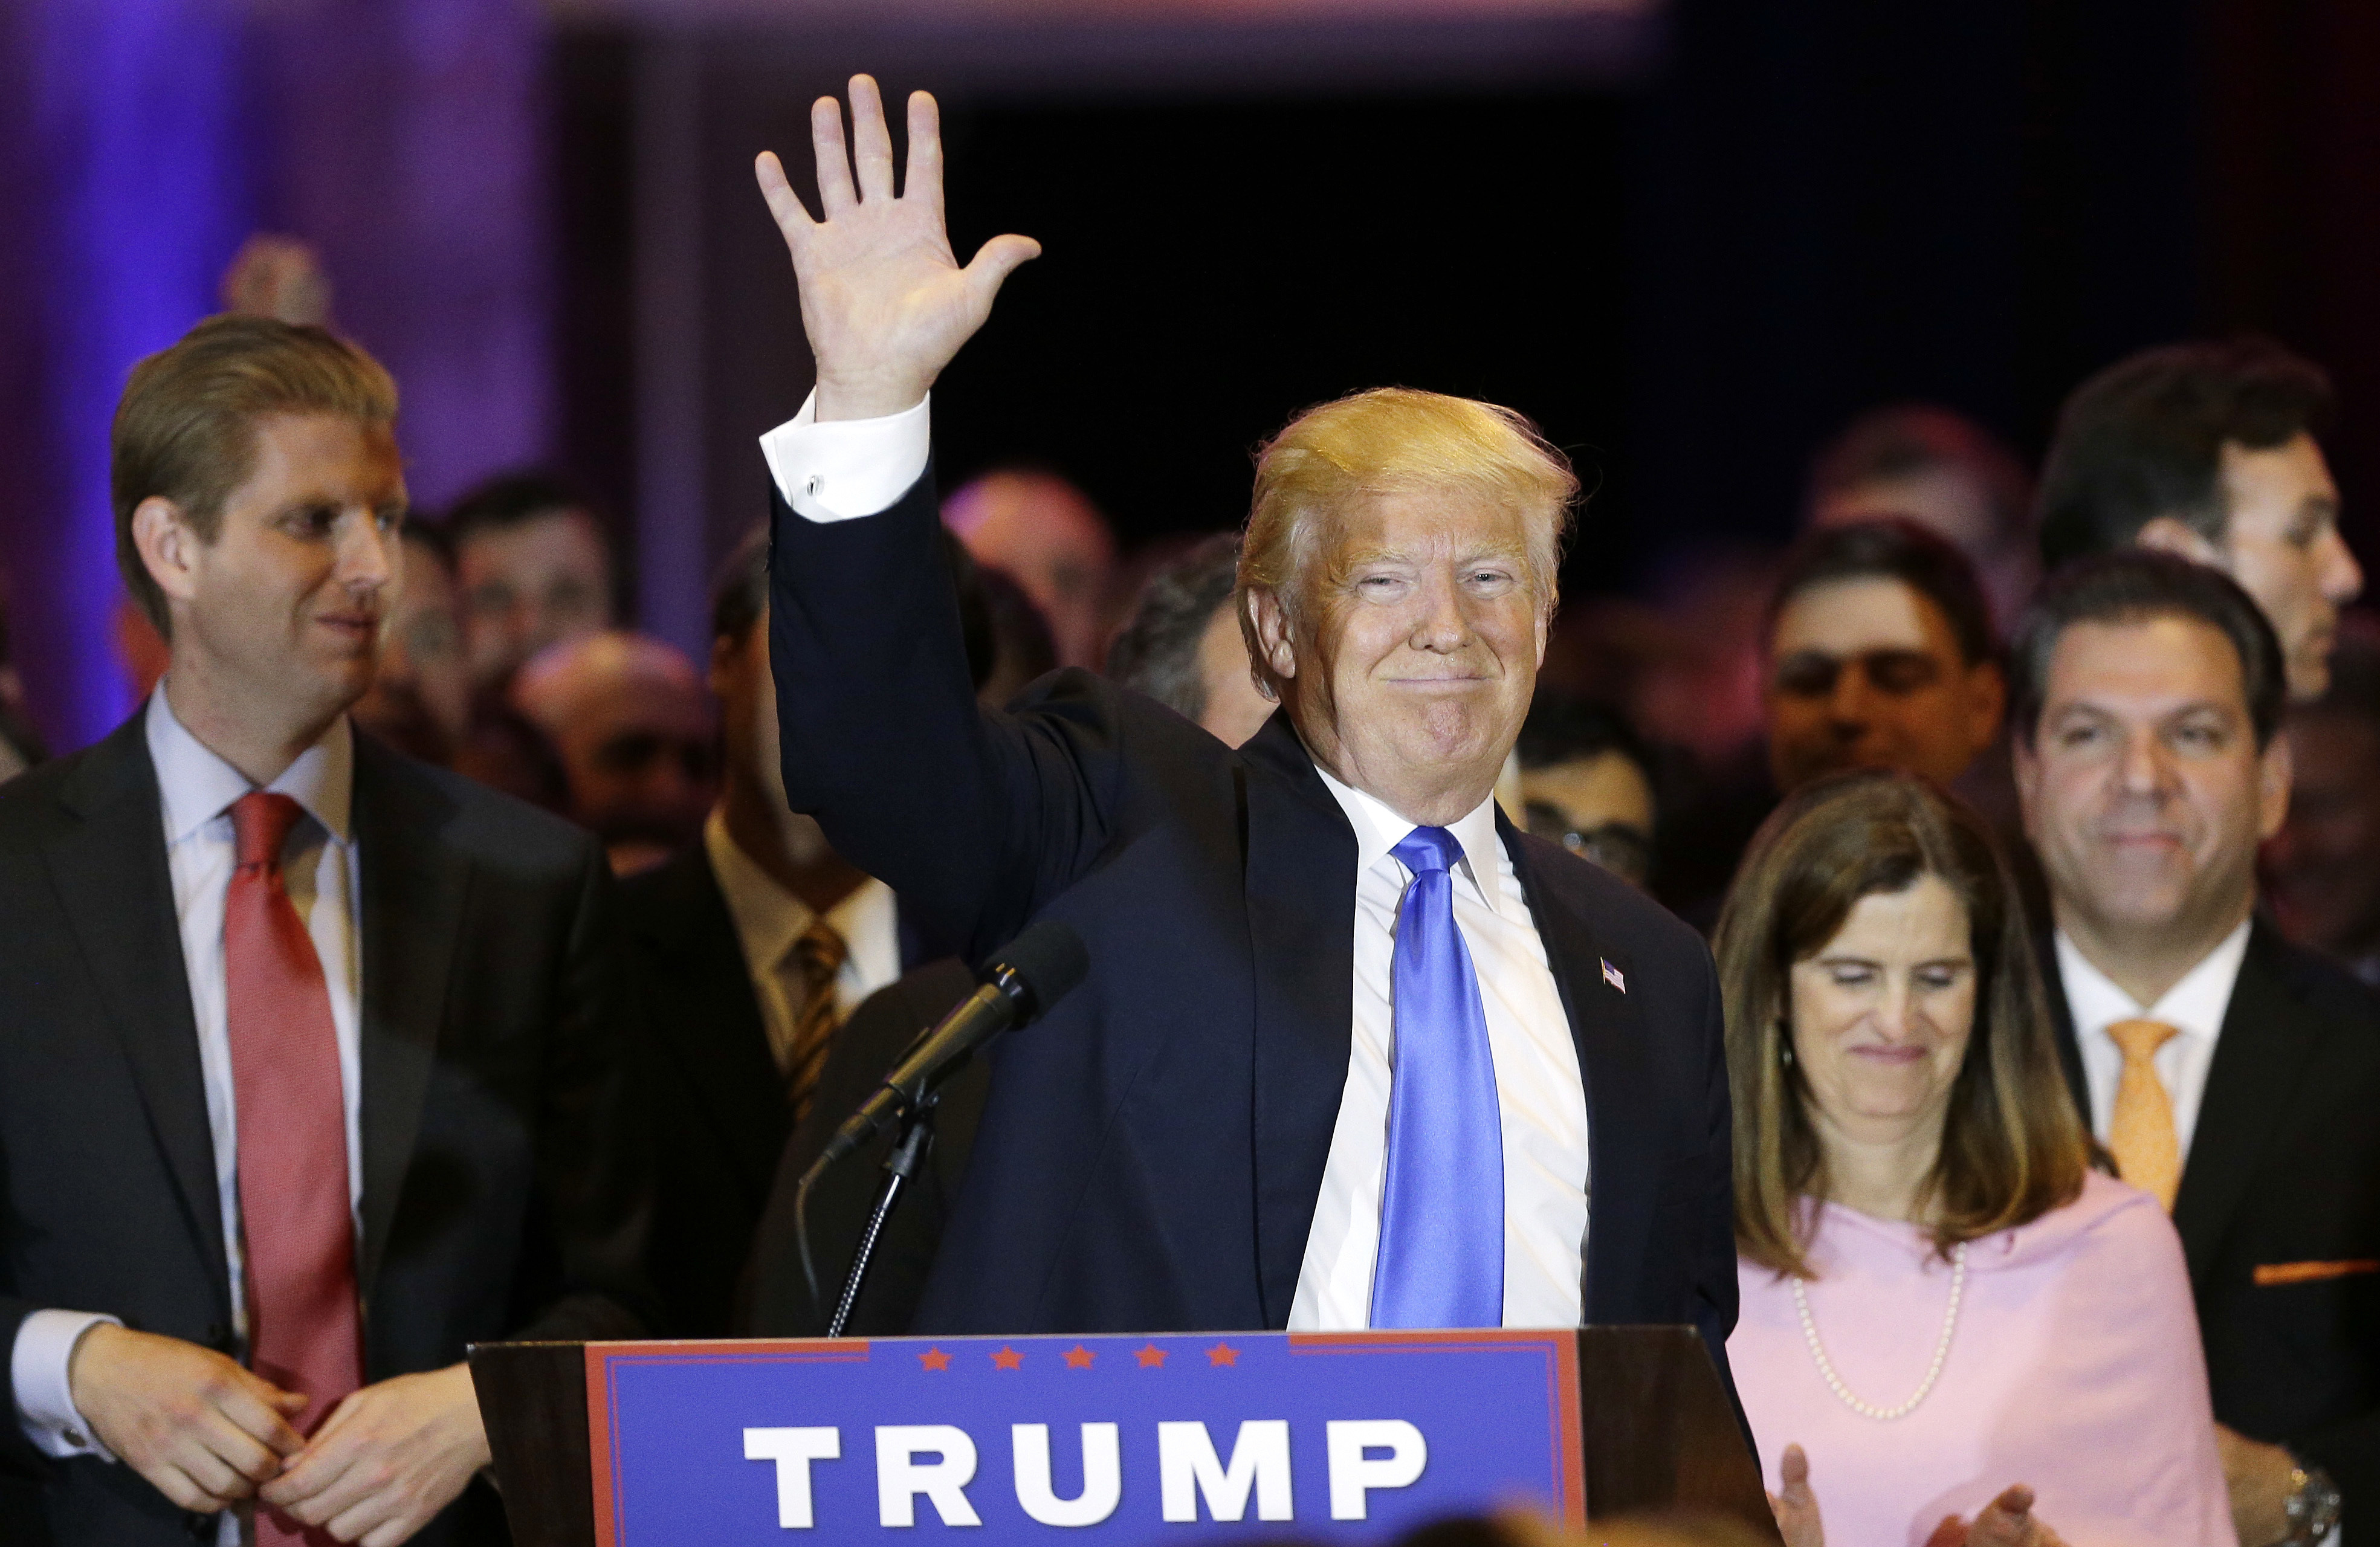 Donald Trump waves after speaking during a primary night event in New York, on April 26, 2016. (Julie Jacobson—AP)